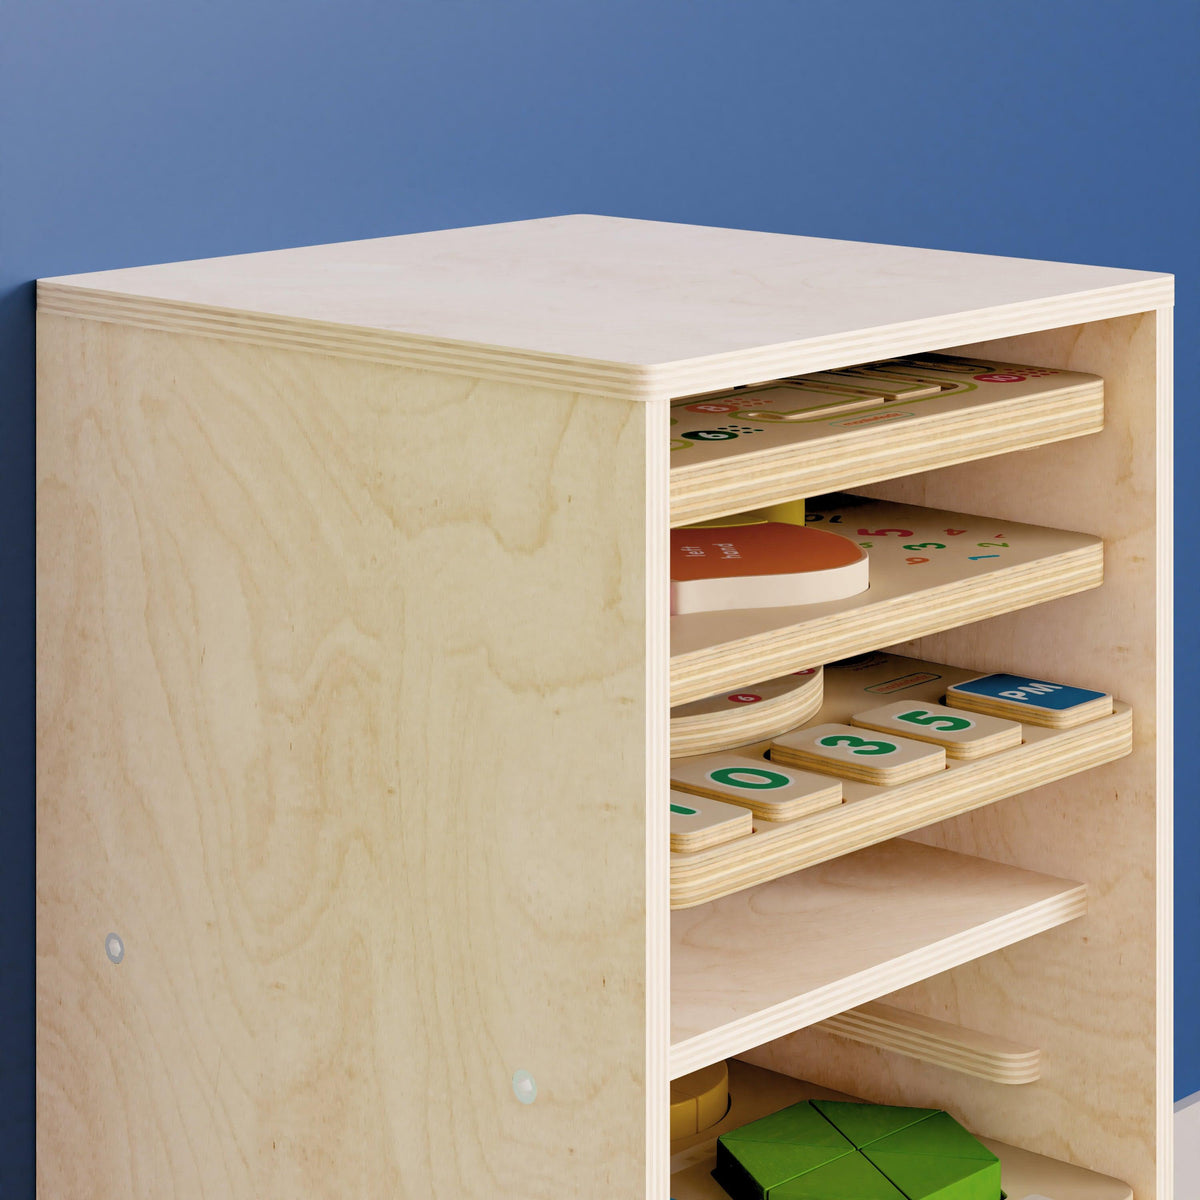 Commercial Engineered Birch Plywood Storage Unit Holds 8 Puzzle Boards - Natural